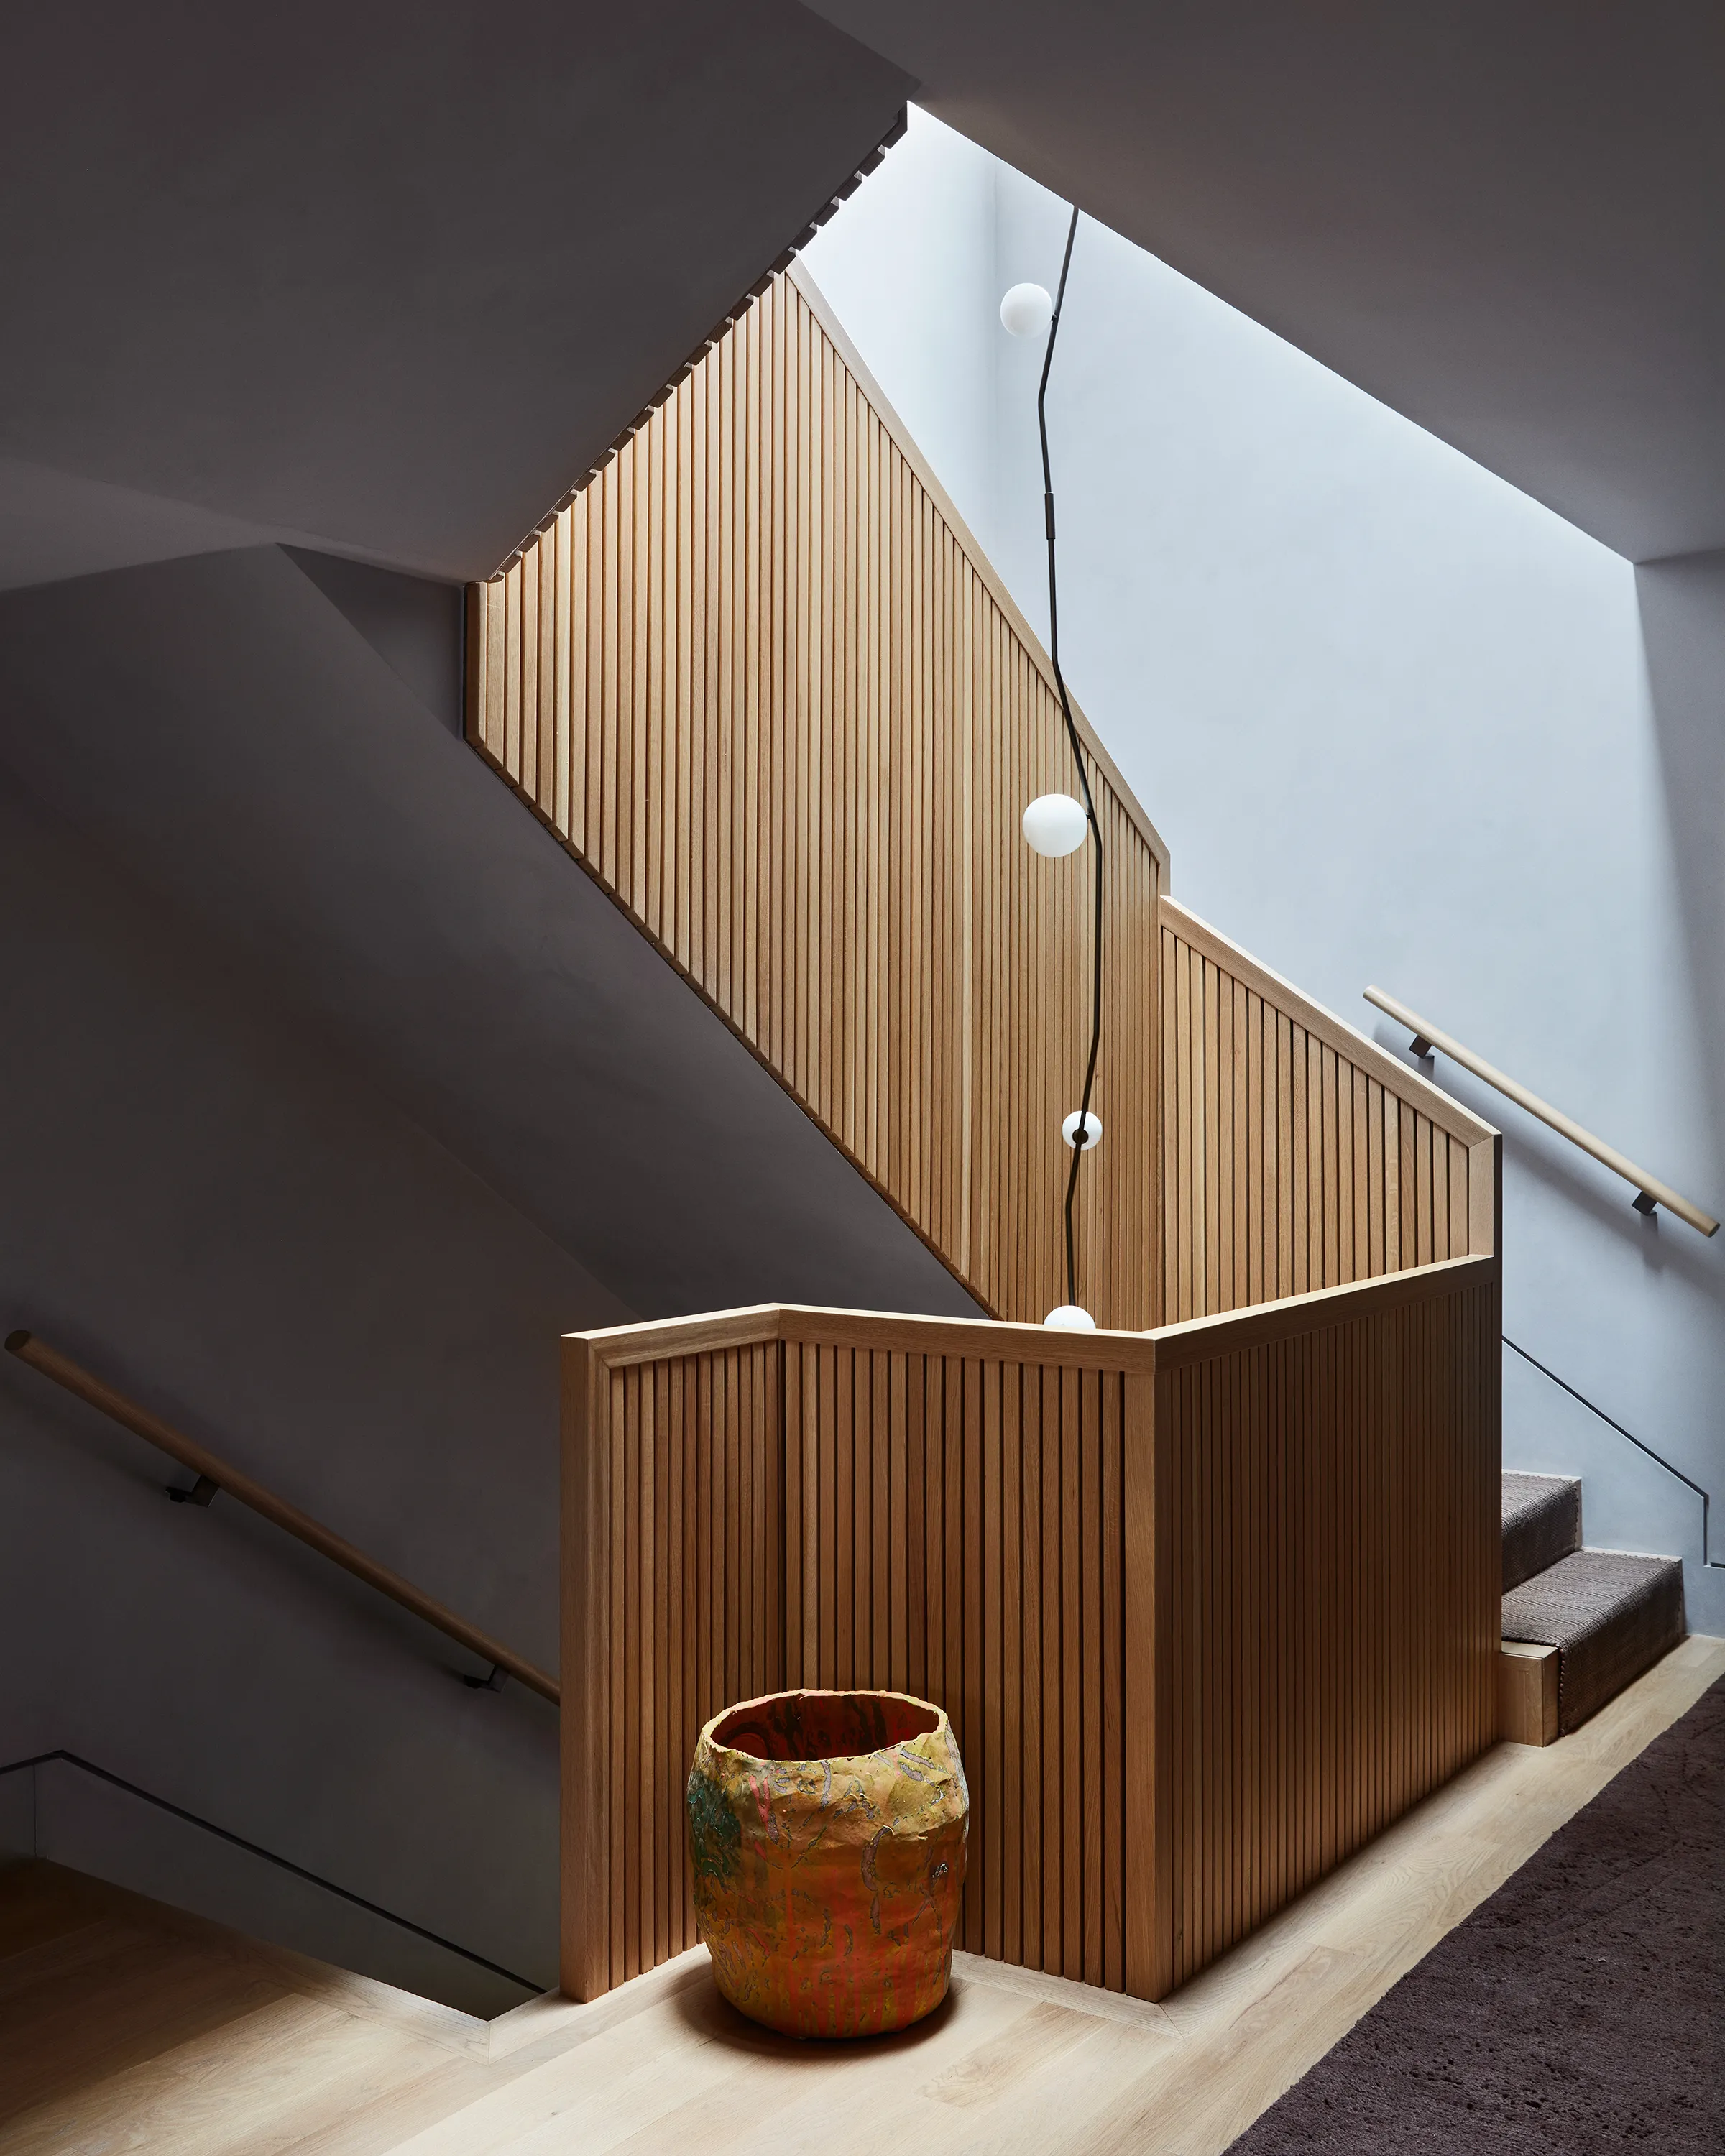 As a Cherry Bomb Chandelier by Lindsey Adelman Studio twines within, the custom staircase exhibits the precision of craft practiced by Clayton Timbrell & Company.